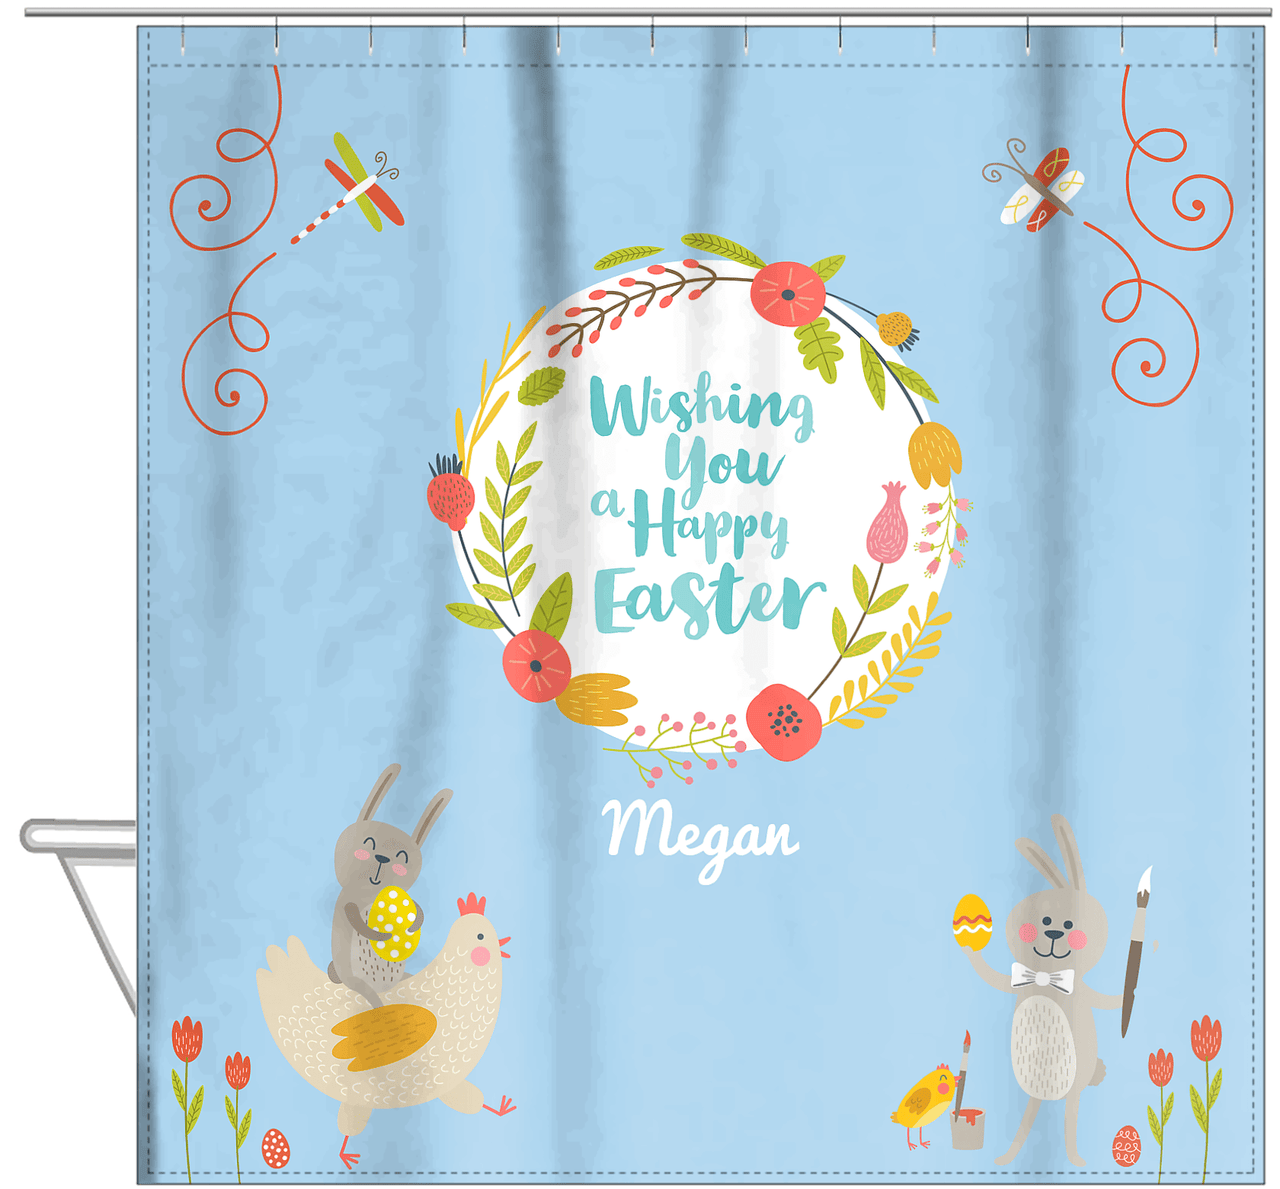 Personalized Easter Shower Curtain VIII - Happy Easter - Blue Background - Hanging View